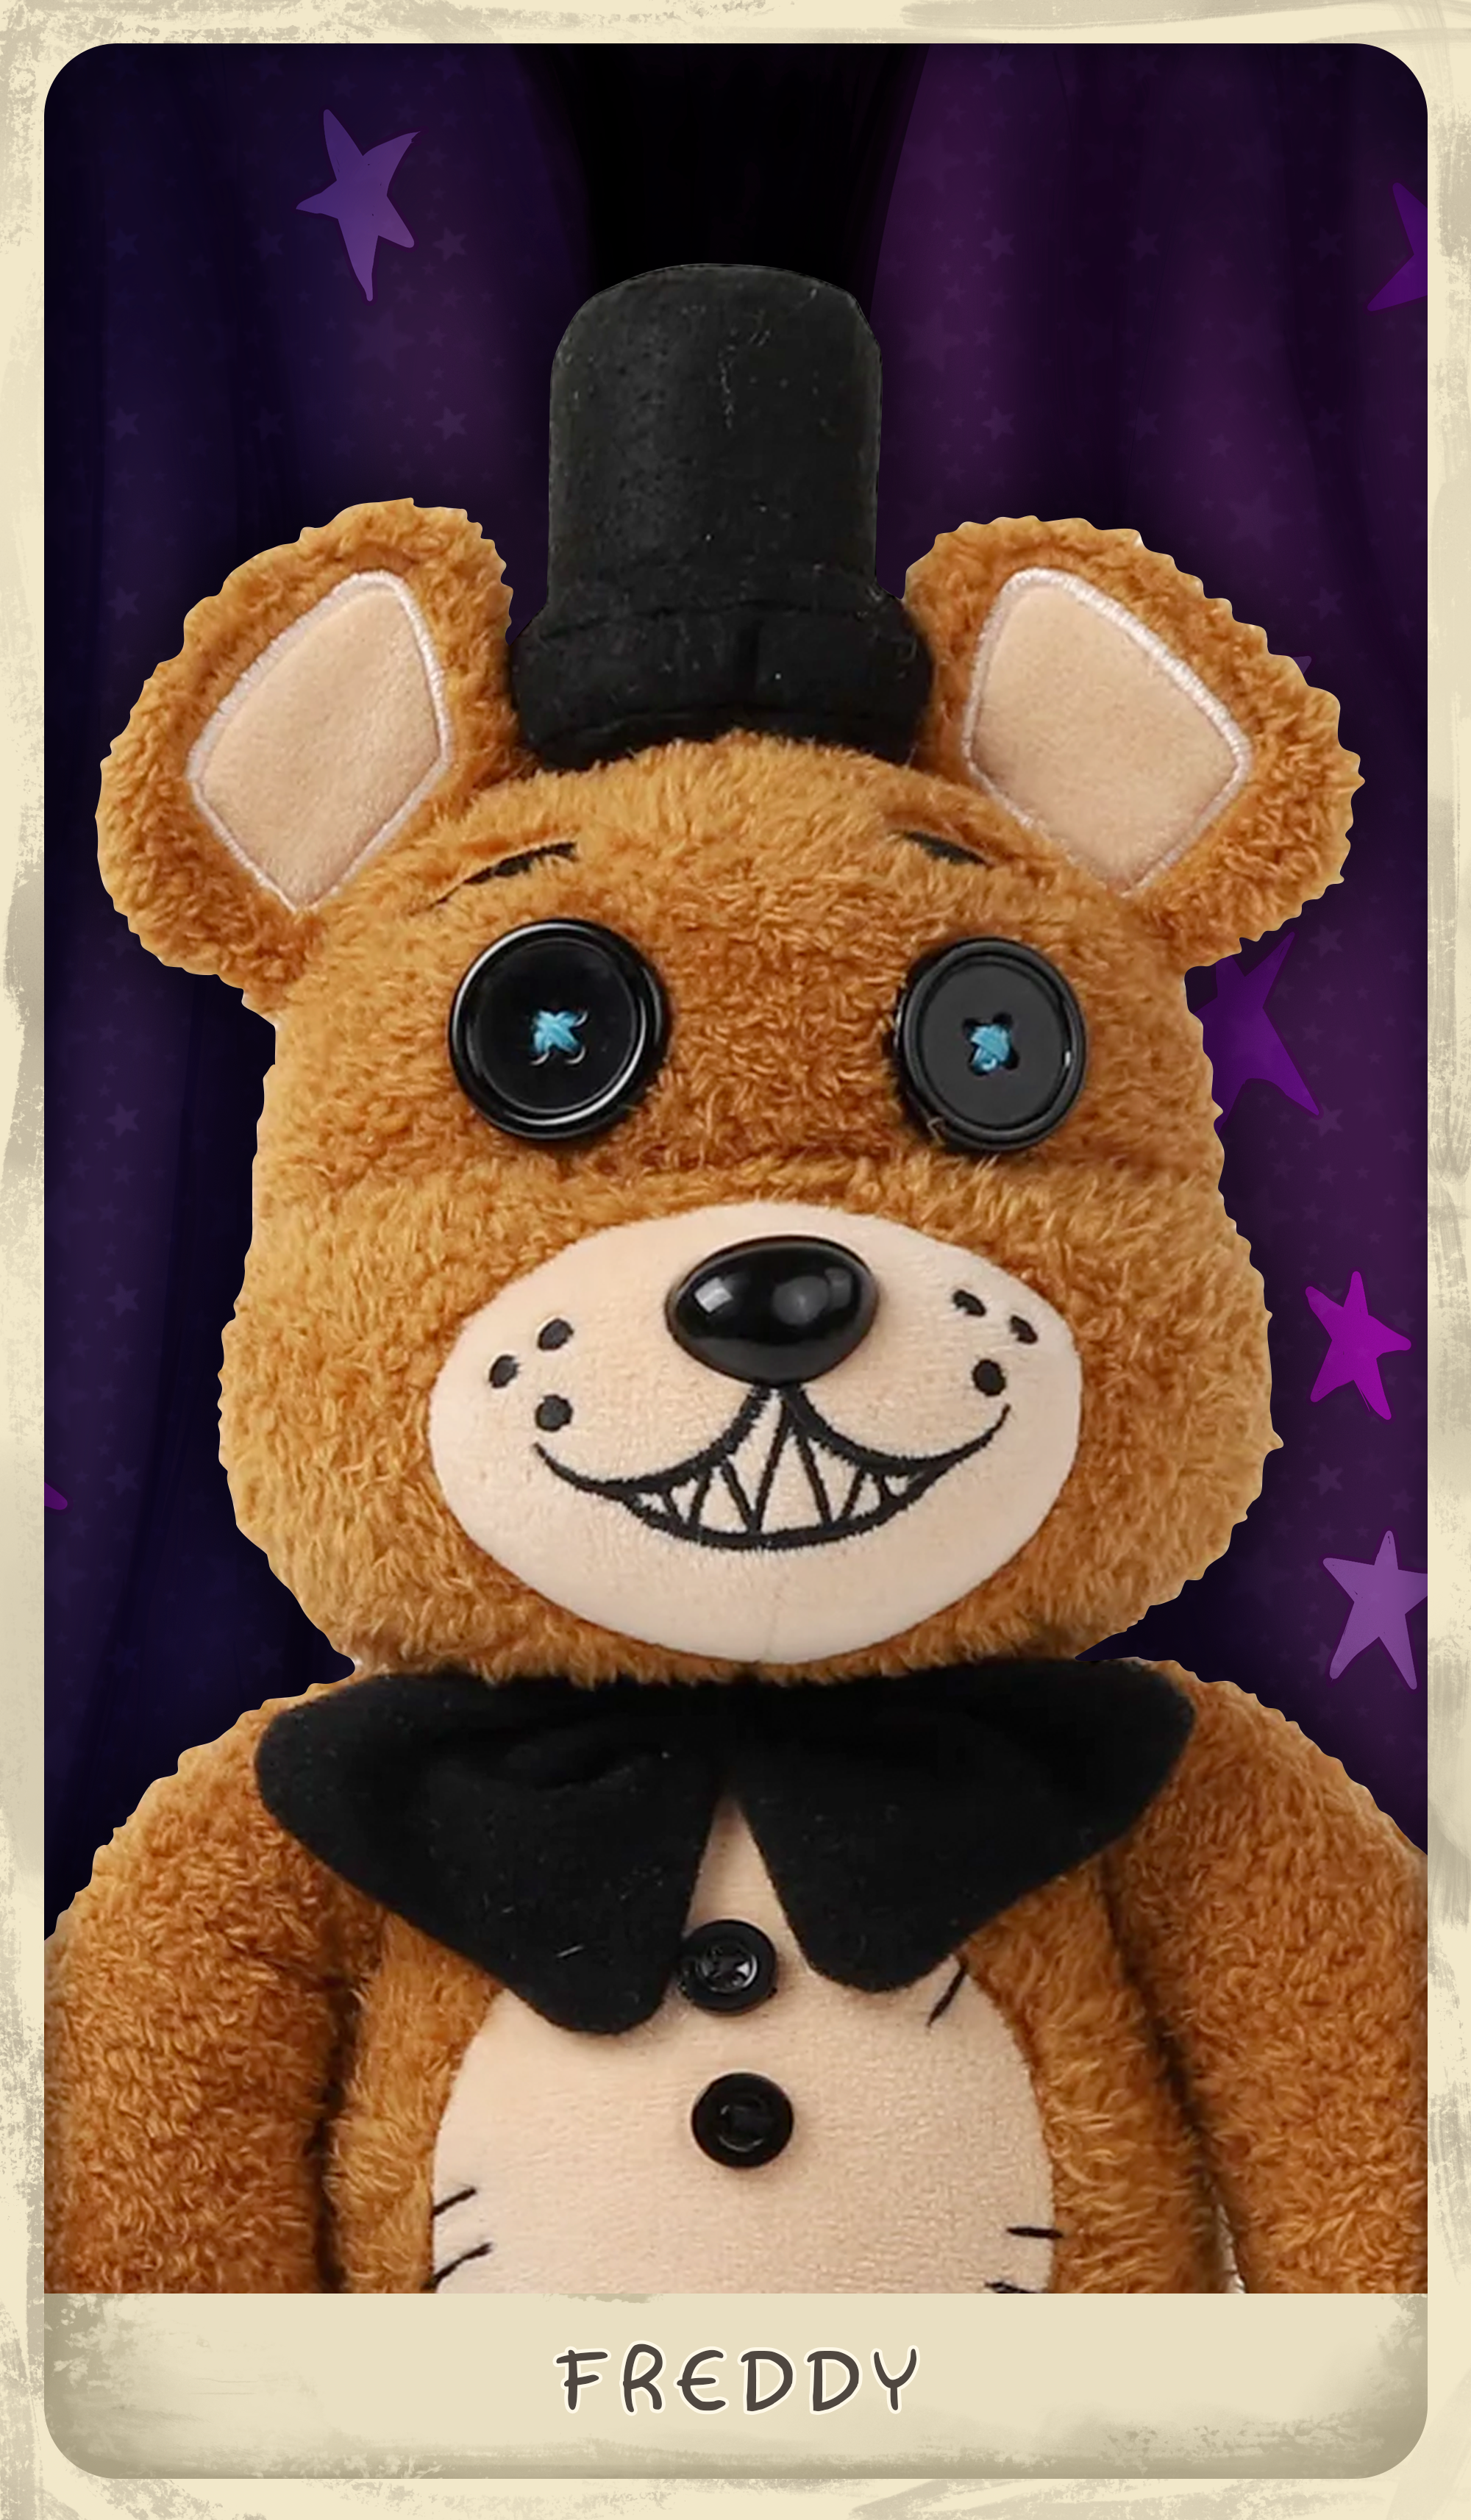 Fnaf-Plush-freddy Plush Toys-all Characters (7)-five Nights